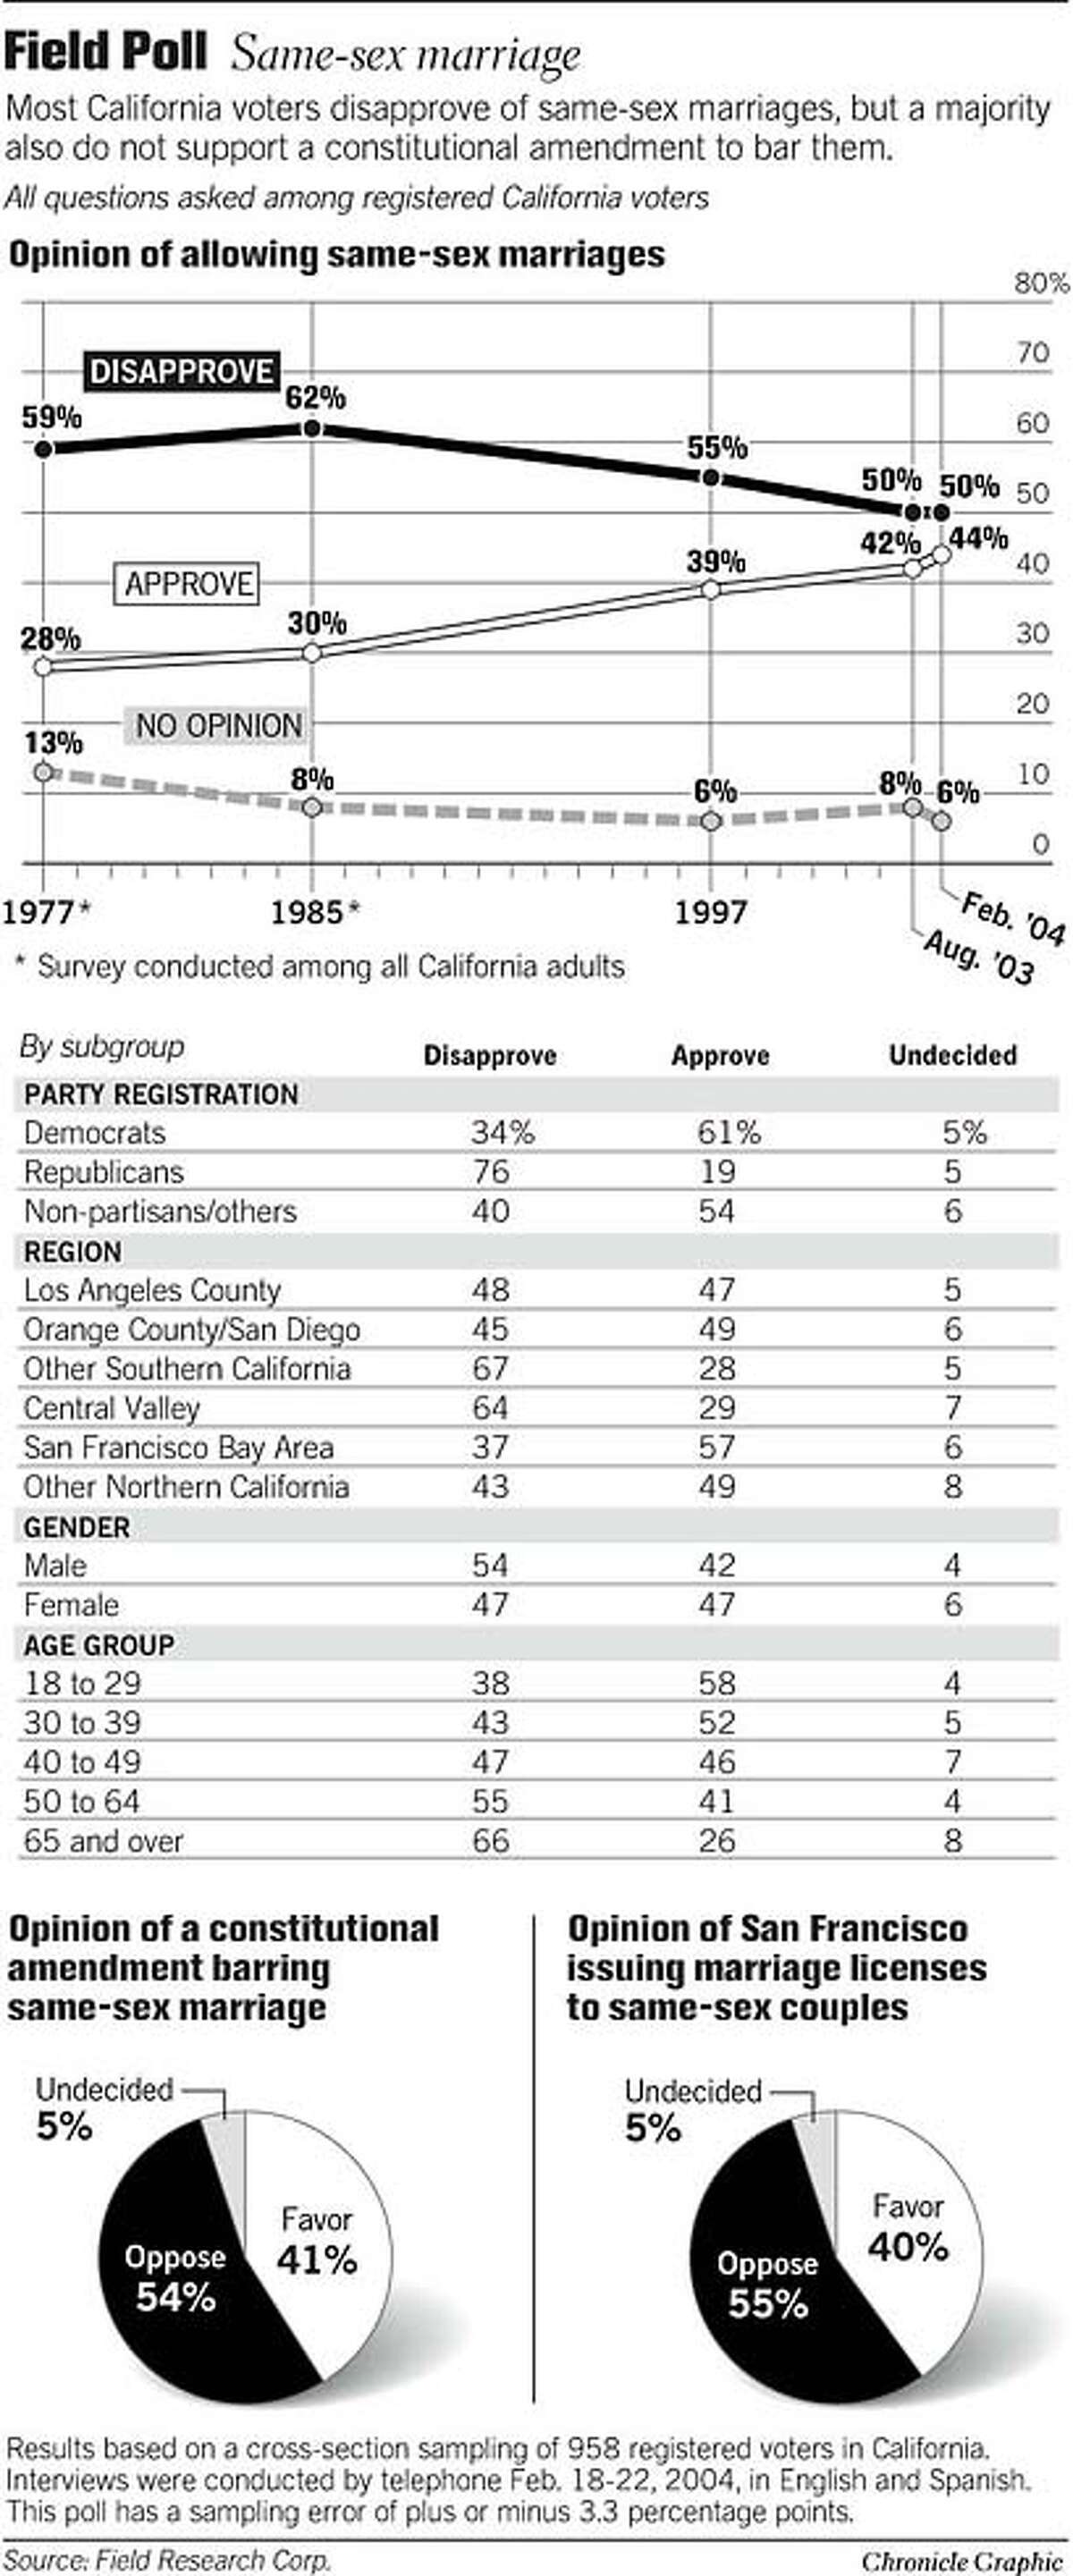 Field Poll: Same-Sex Marriage. Chronicle Graphic